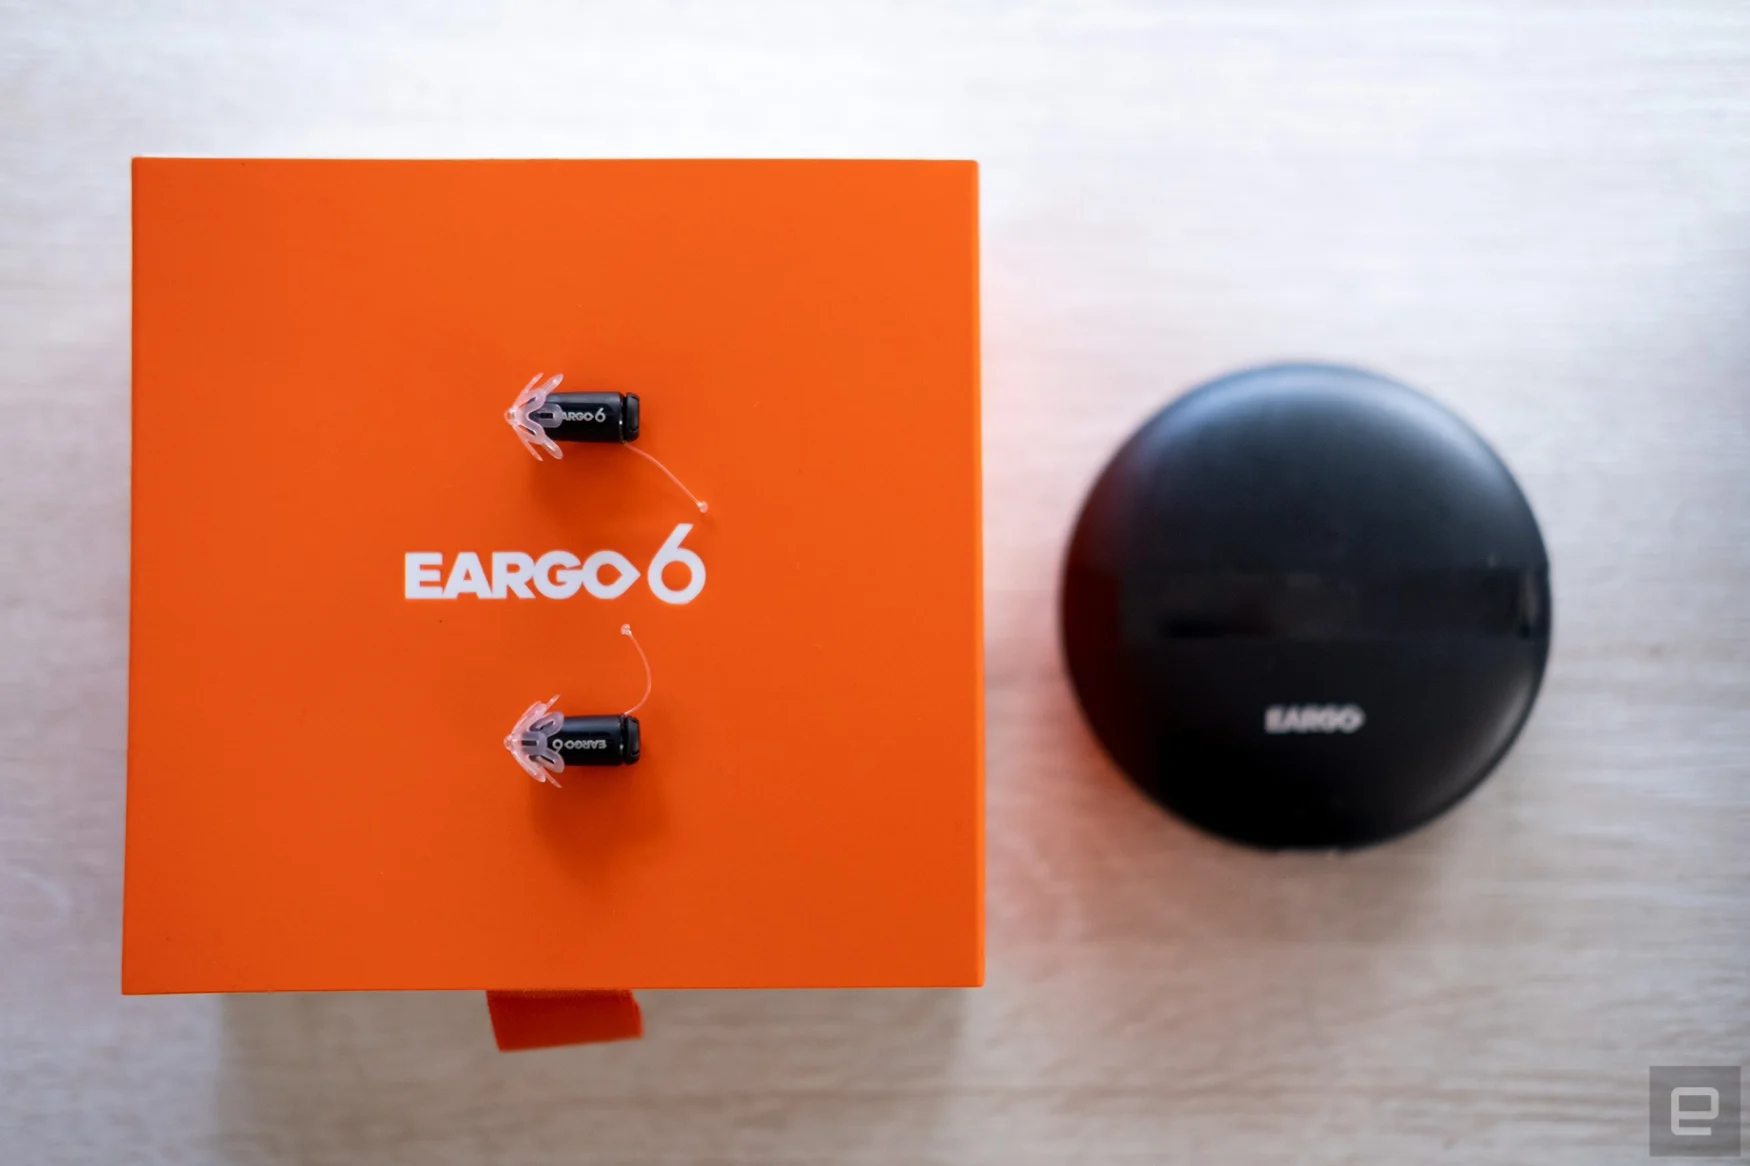 Eargo 6 hearing aids with Sound Adjust shown on their packaging with the portable charger.